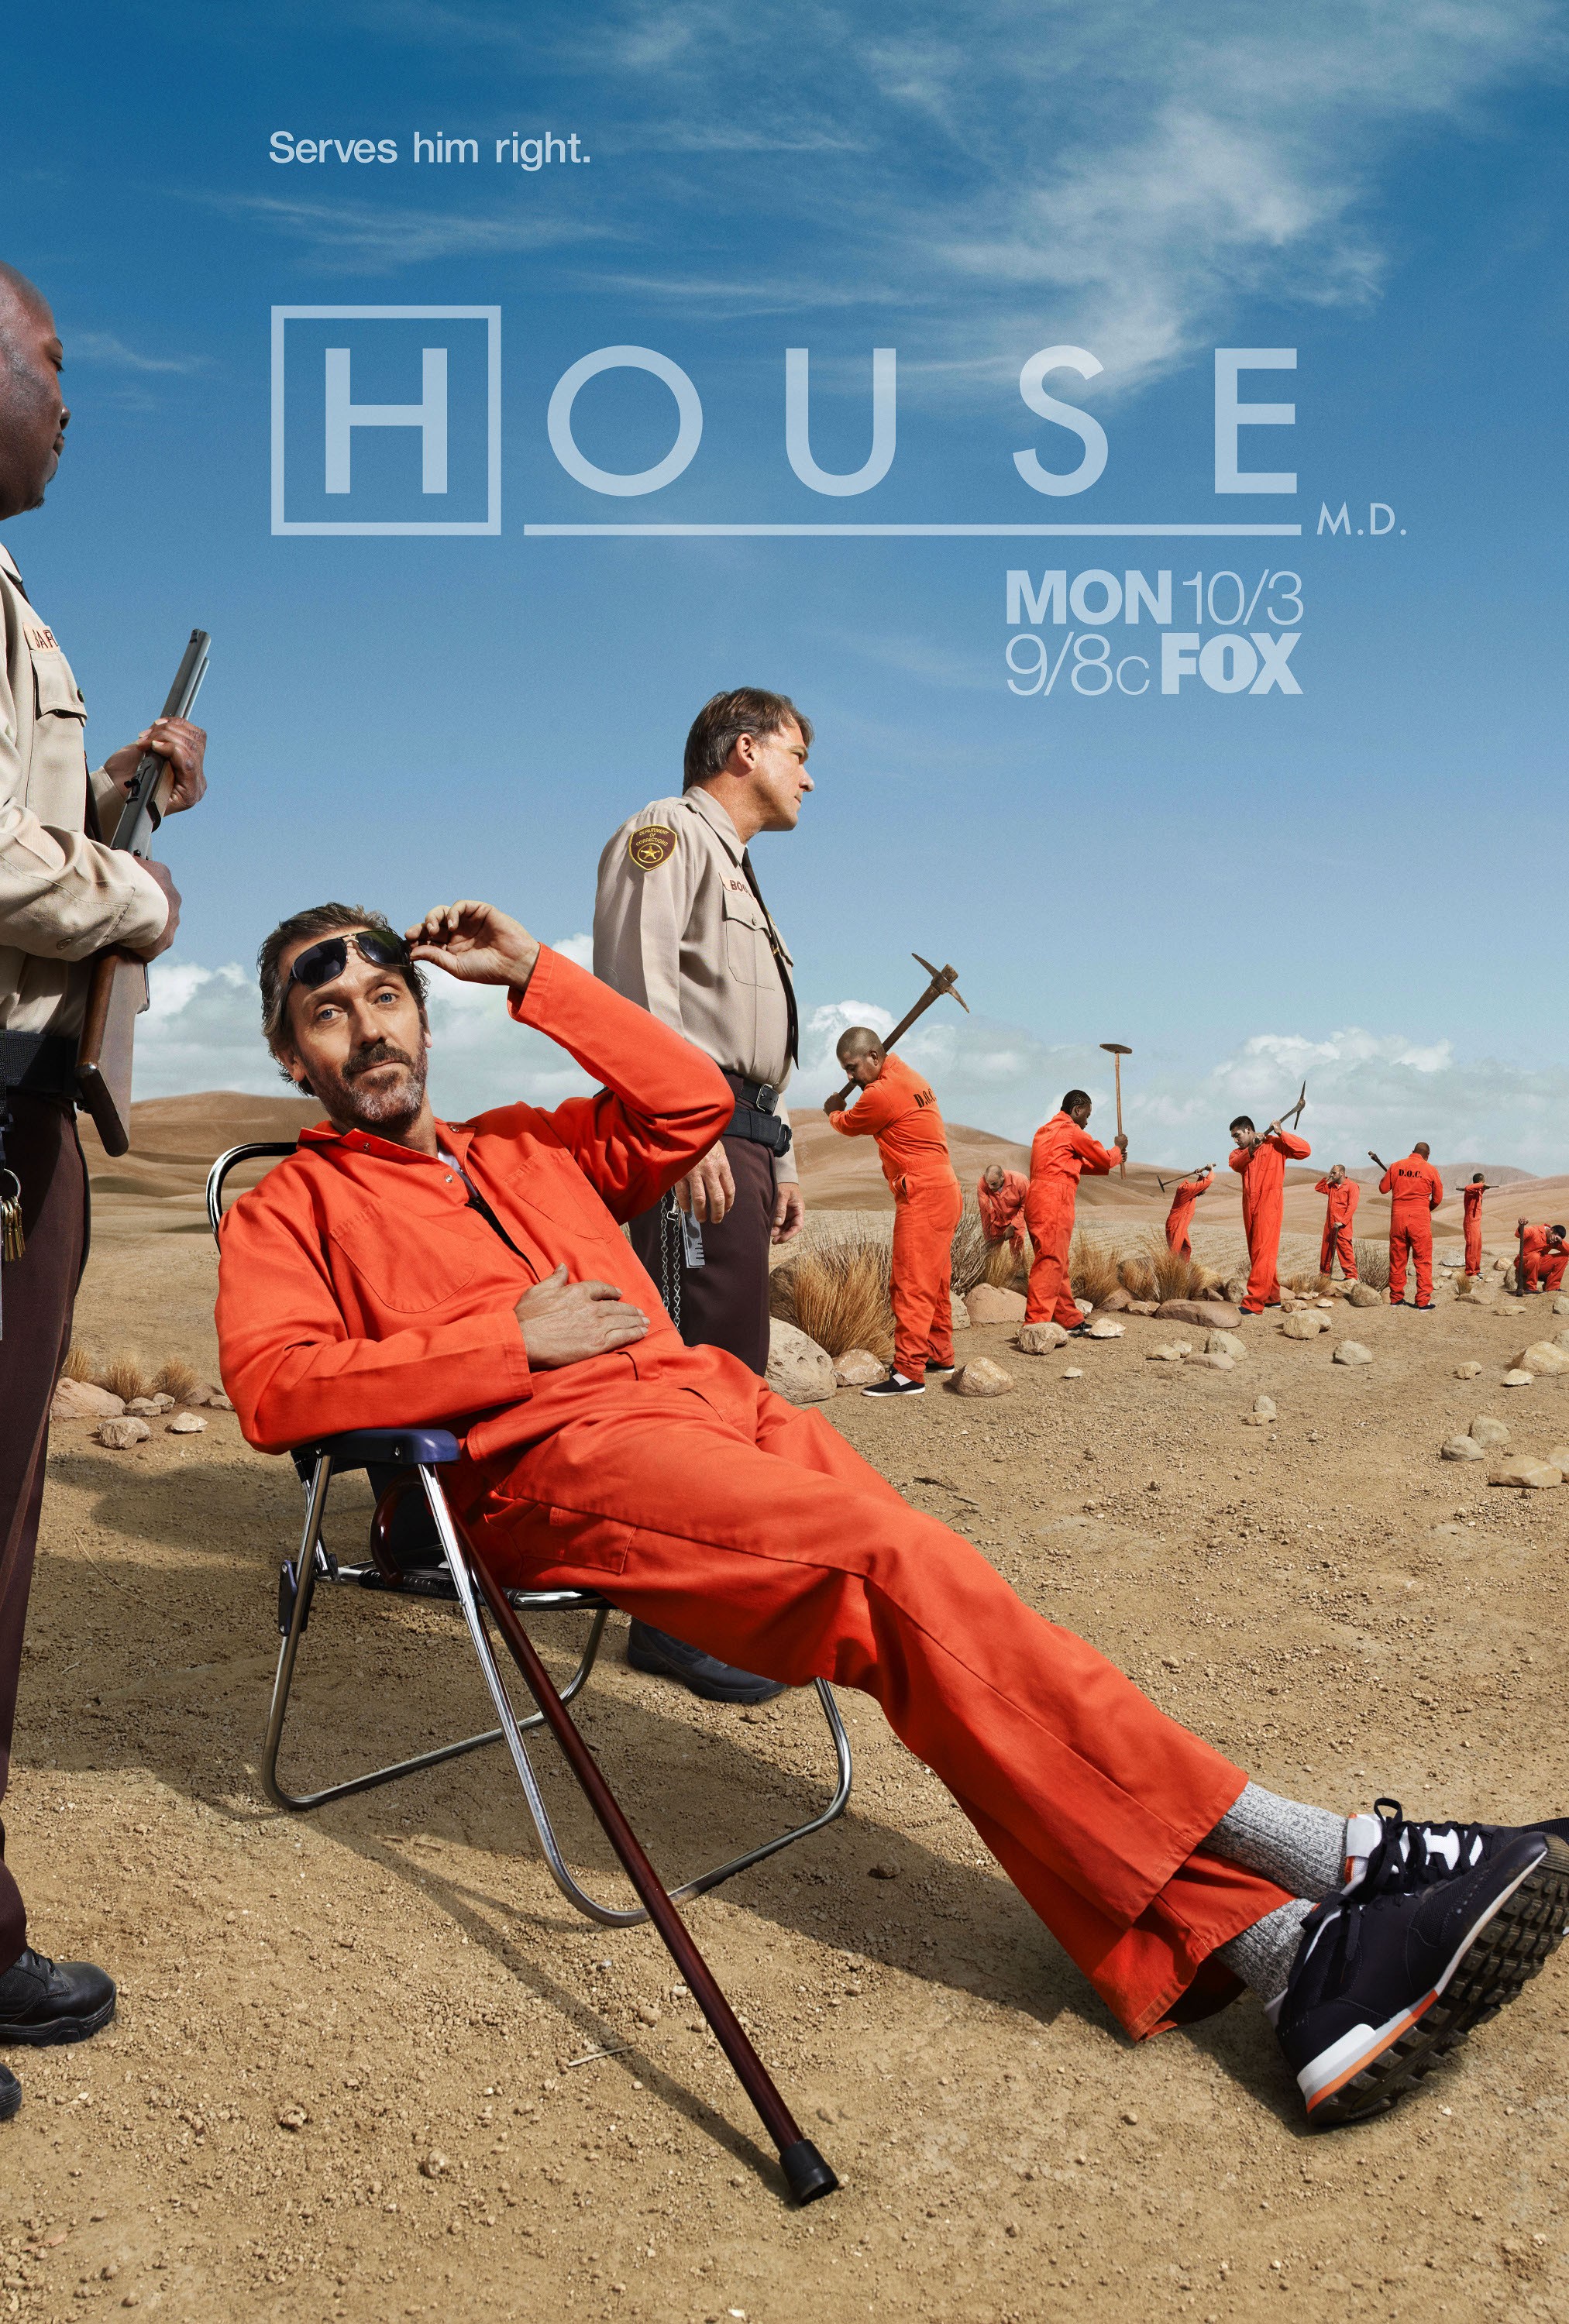 Mega Sized TV Poster Image for House, M.D. (#16 of 20)